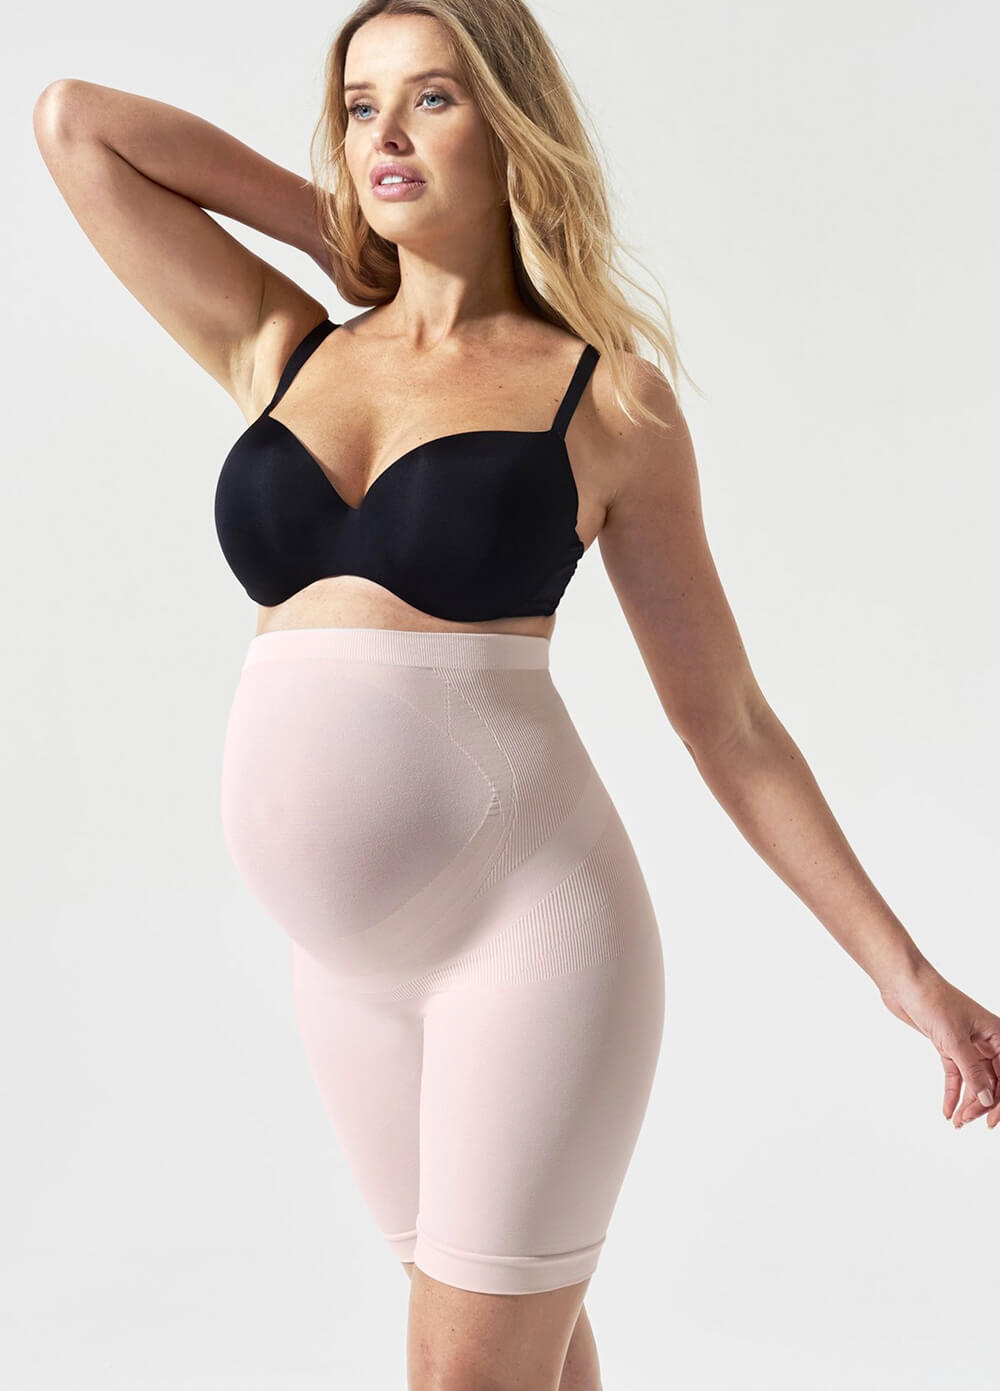 Everyday Belly Support Maternity Girlshort in Nude by Blanqi